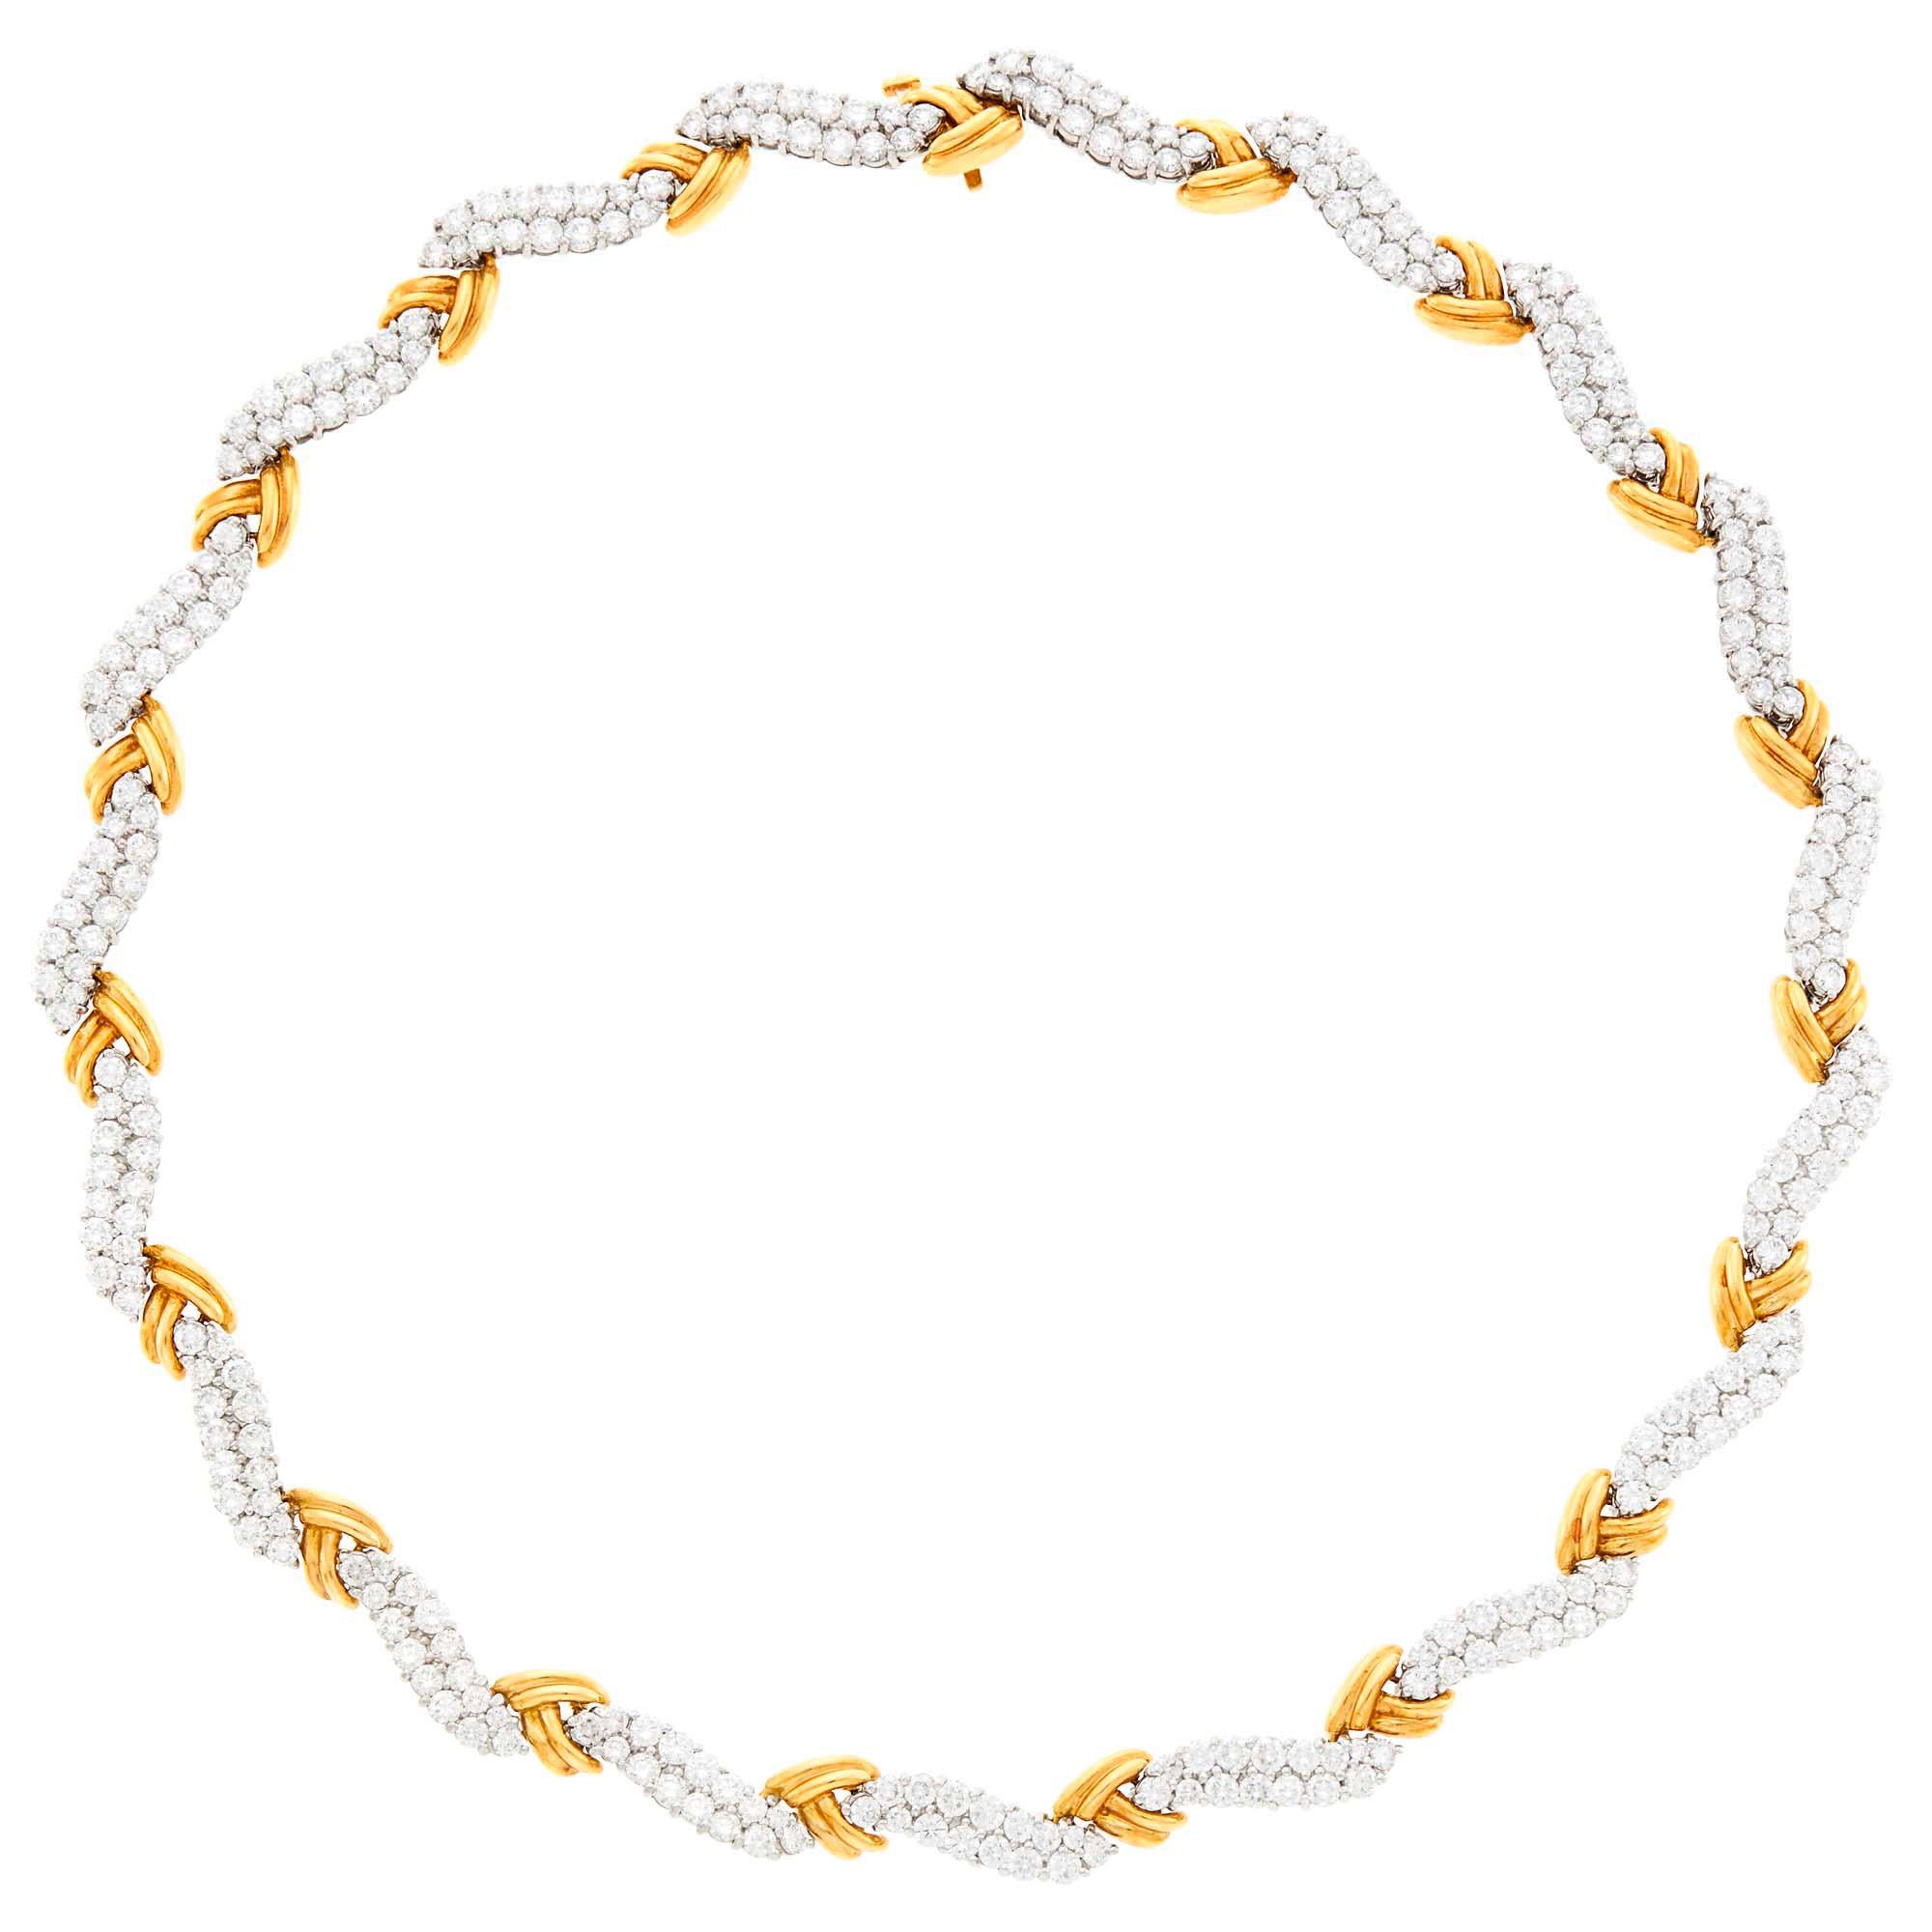 Tiffany & Co. Platinum, Gold and Diamond Necklace This necklace has curved platinum links
of 285 roundvery fine quality diamonds approx. 18.50 carats,  joined by overlapping polished 18k yellow gold ribbed links. 
Width of gold links 5/16 inch and